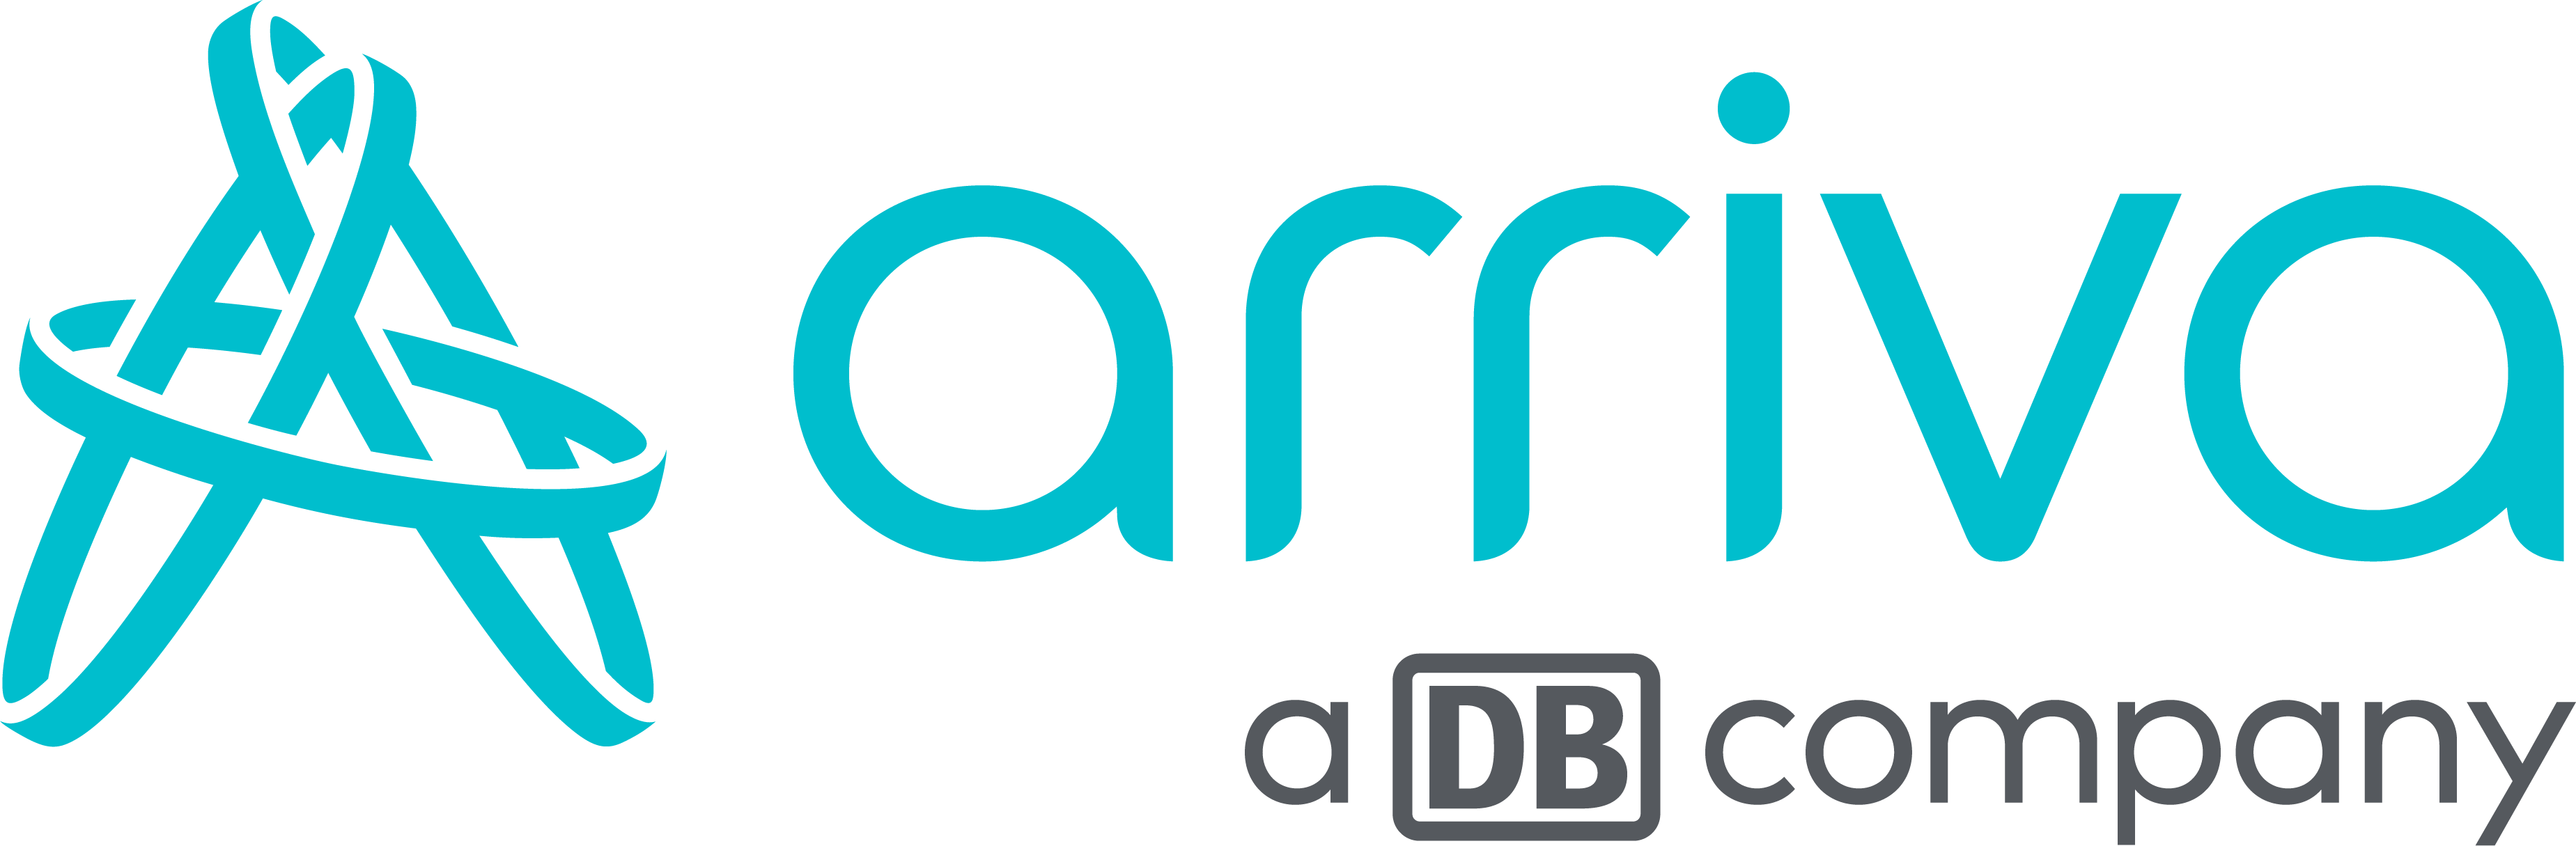 Autotrans by Arriva logo